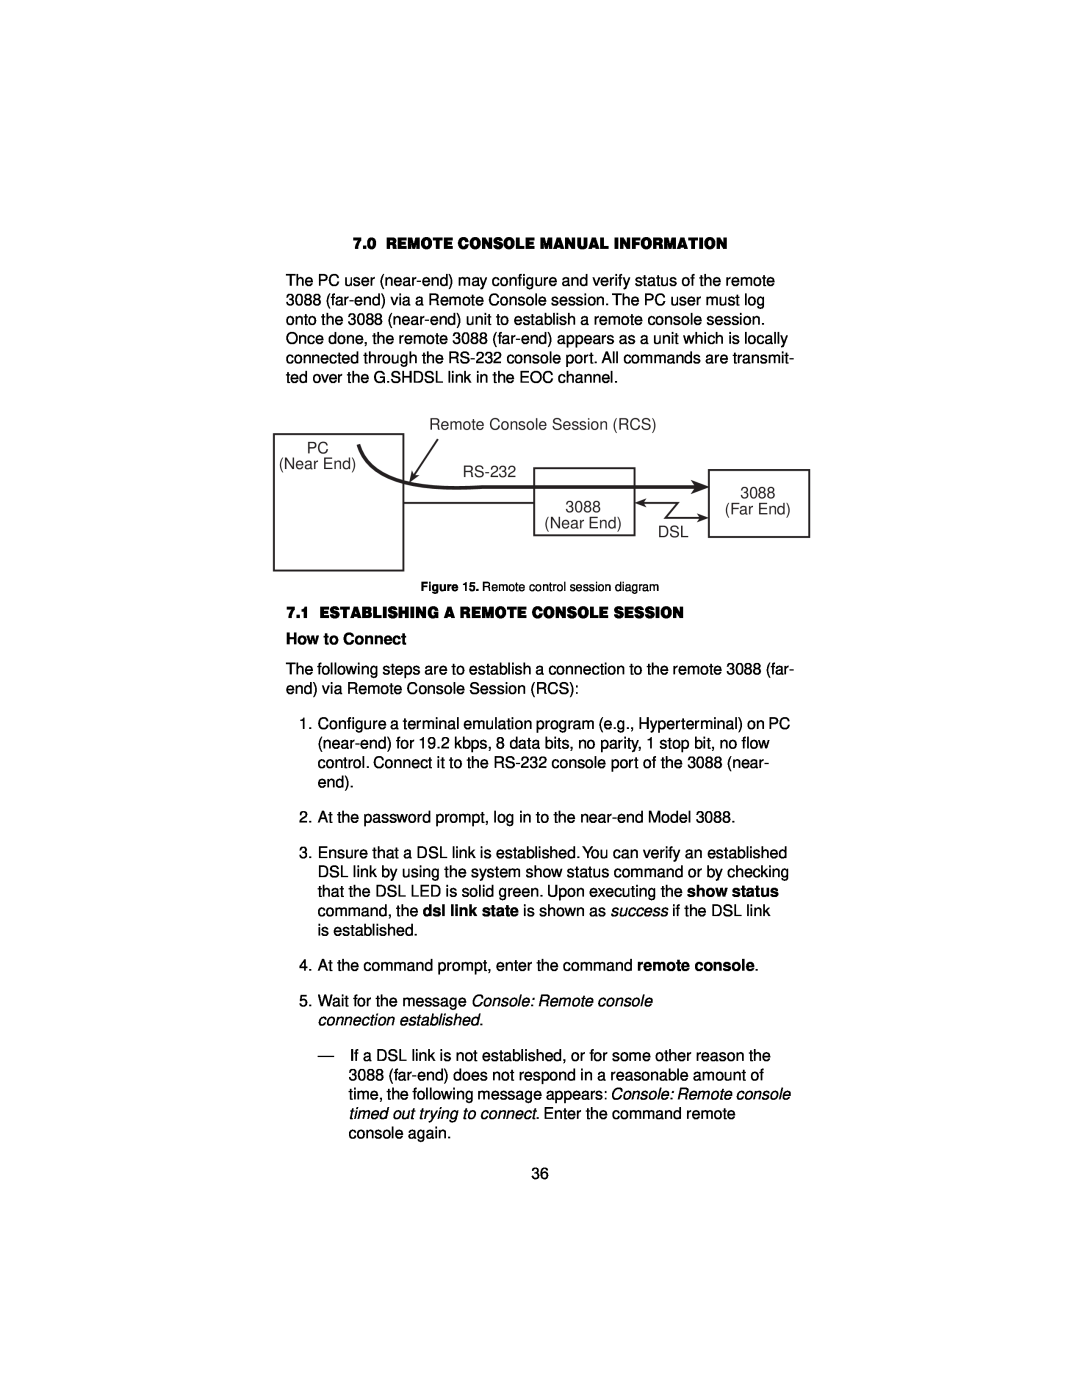 Patton electronic 3088 user manual Remote Console Manual Information, ESTABLISHING A REMOTE CONSOLE SESSION How to Connect 